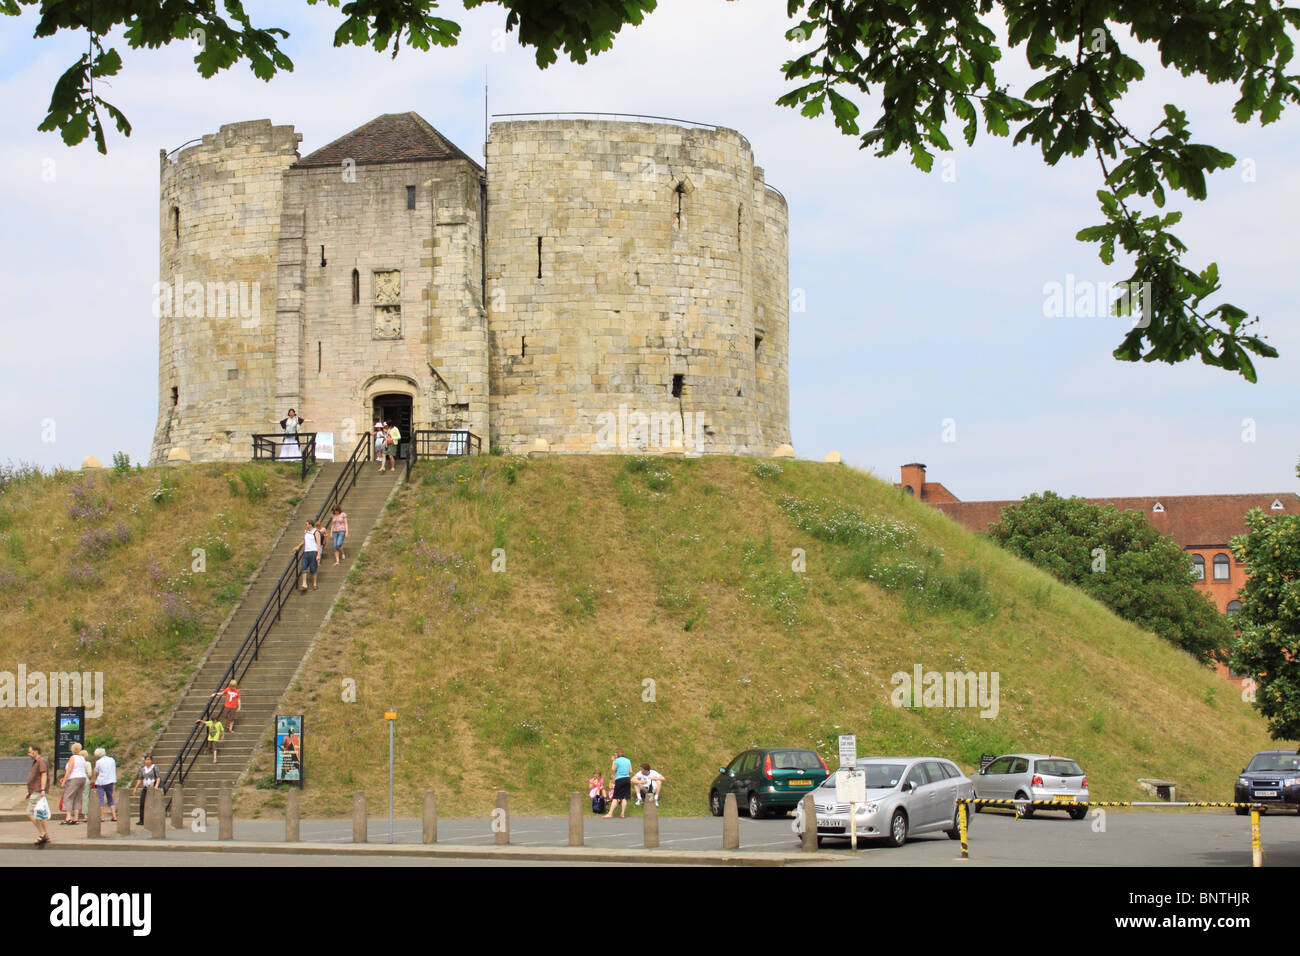 Clifford's Tower, City of York, England Stock Photo